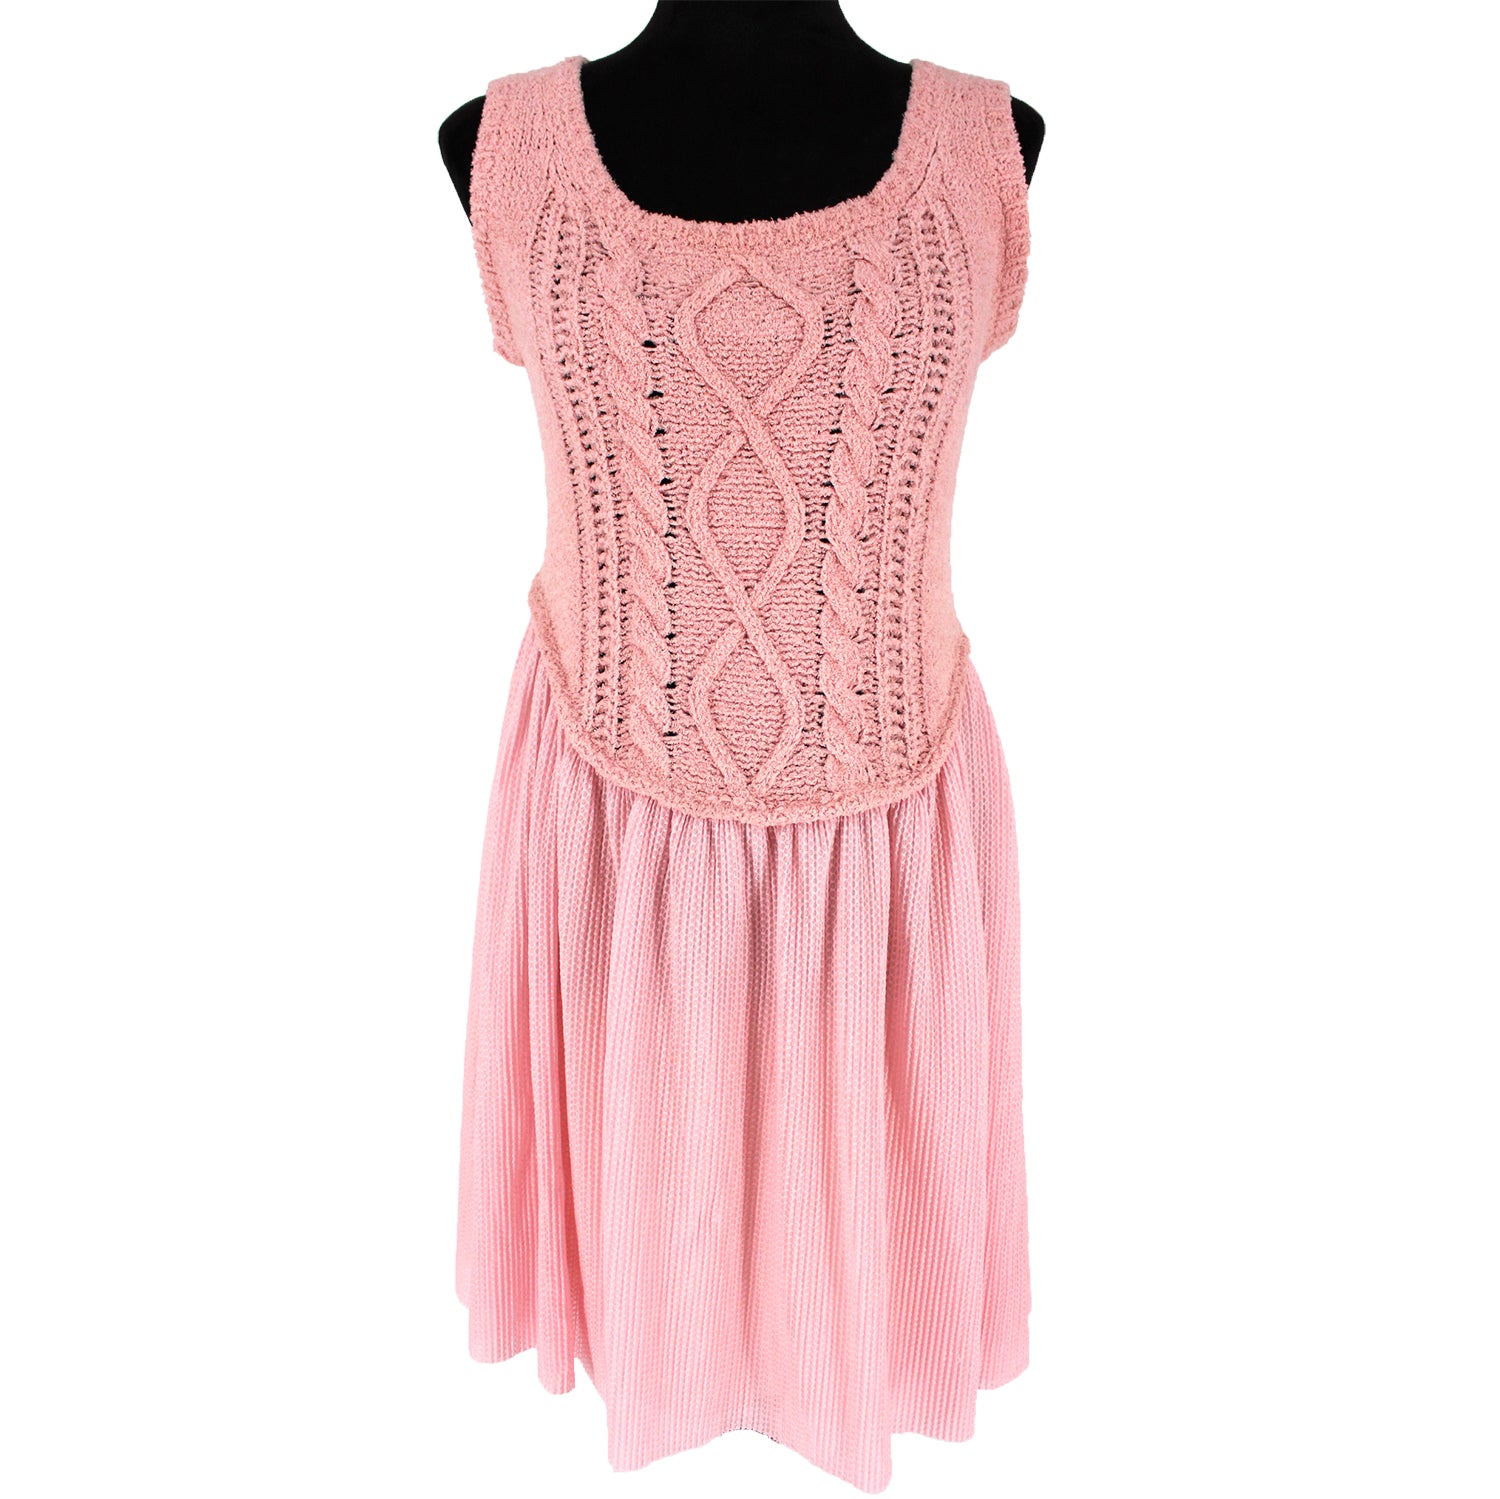 NWT Boutique Moschino Pink Cable Knit Dress Size 6